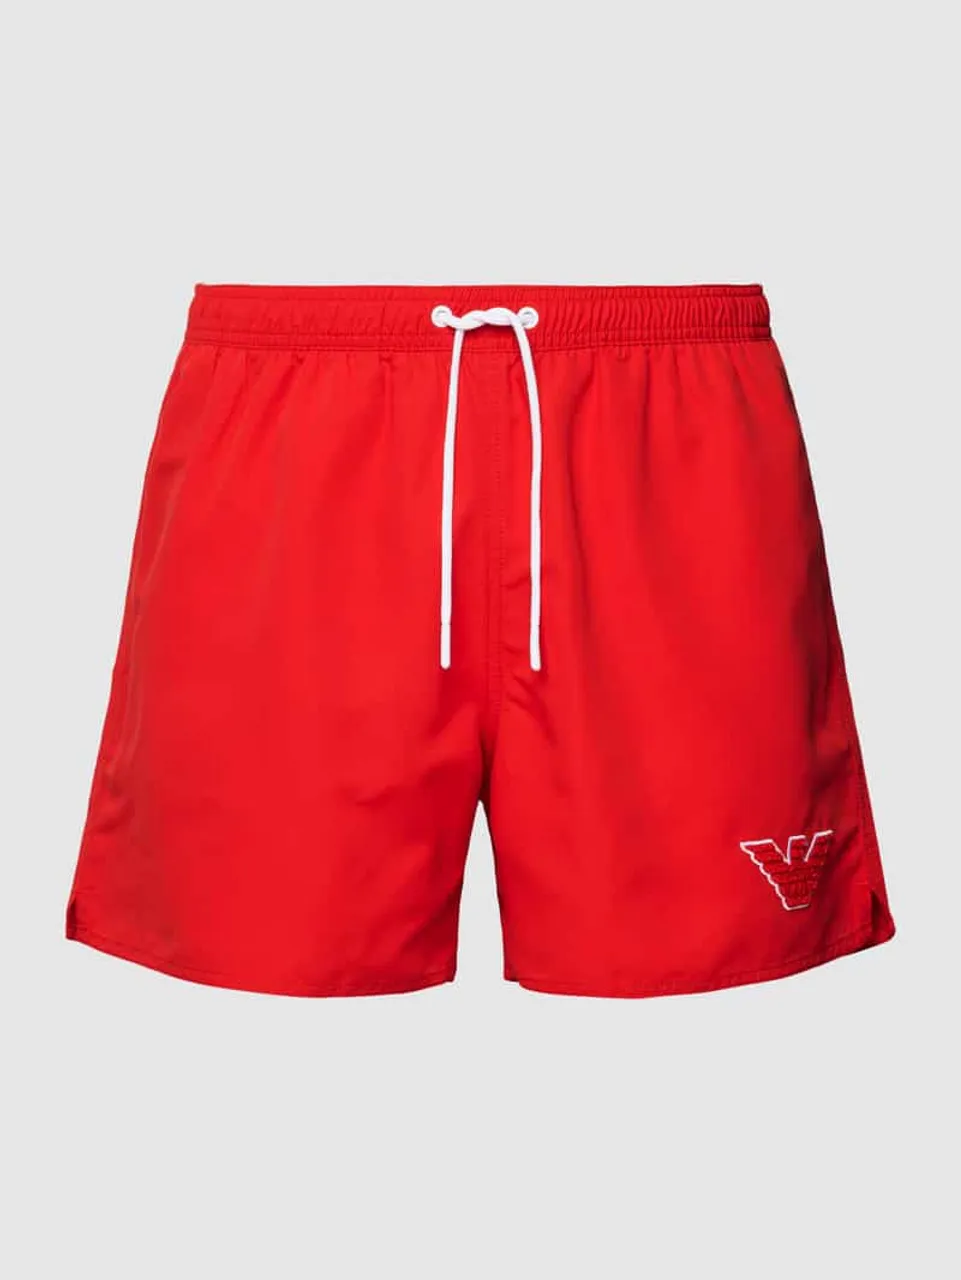 Emporio Armani Badehose mit Label-Patch Modell 'SPONGE EAGLE' in Rot